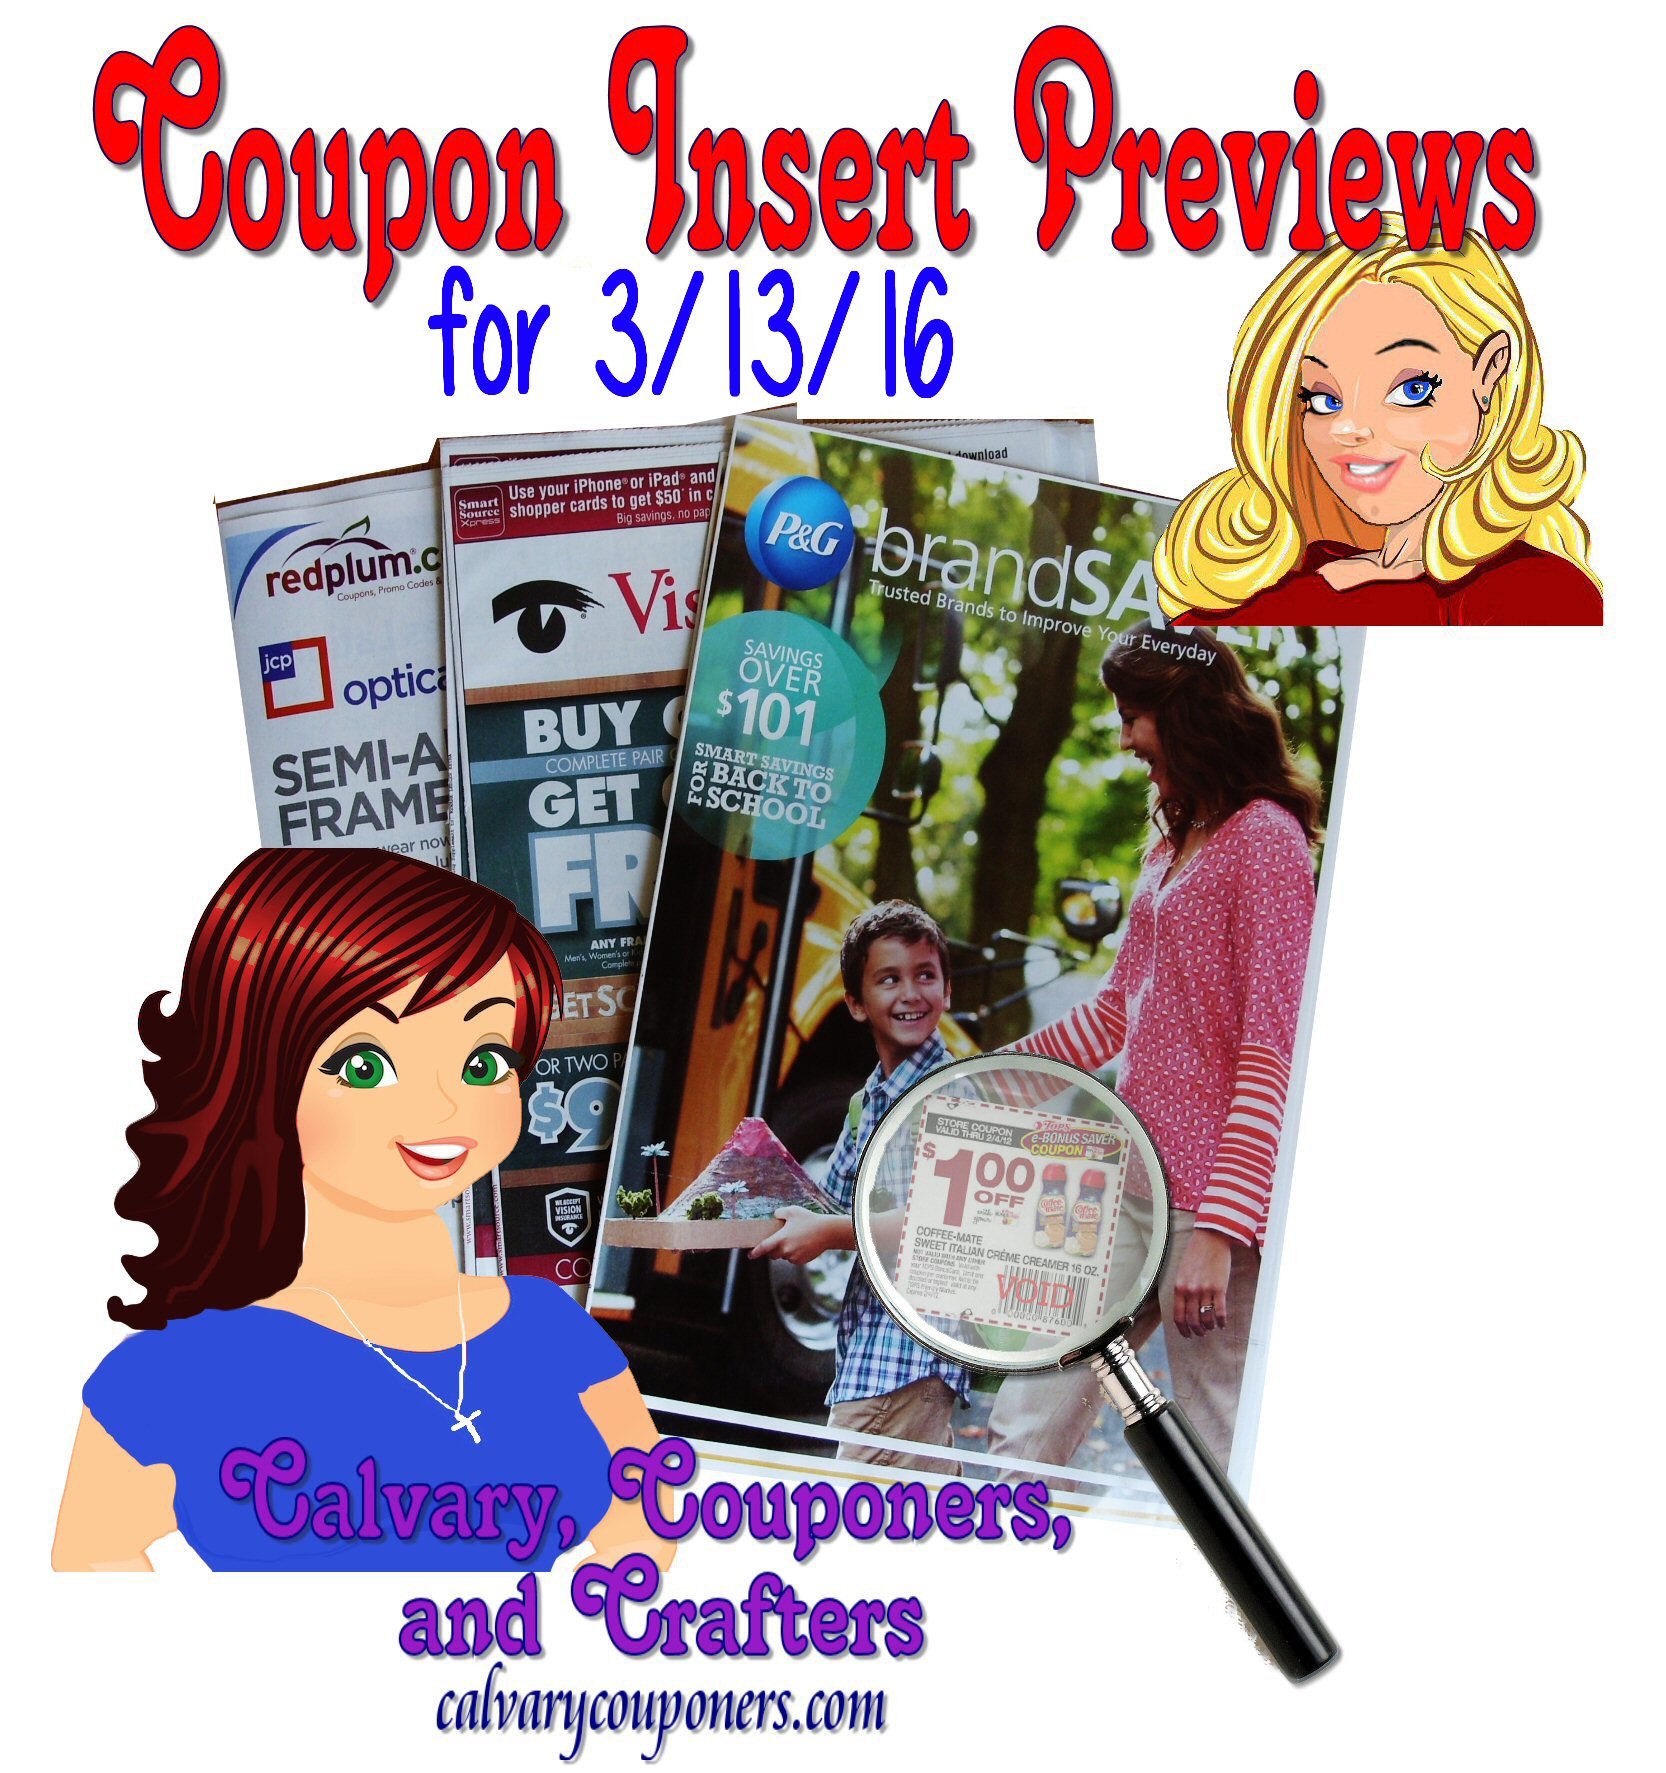 Sunday Coupon Insert Preview for 3-13-16 Calvary Couponers and Crafters